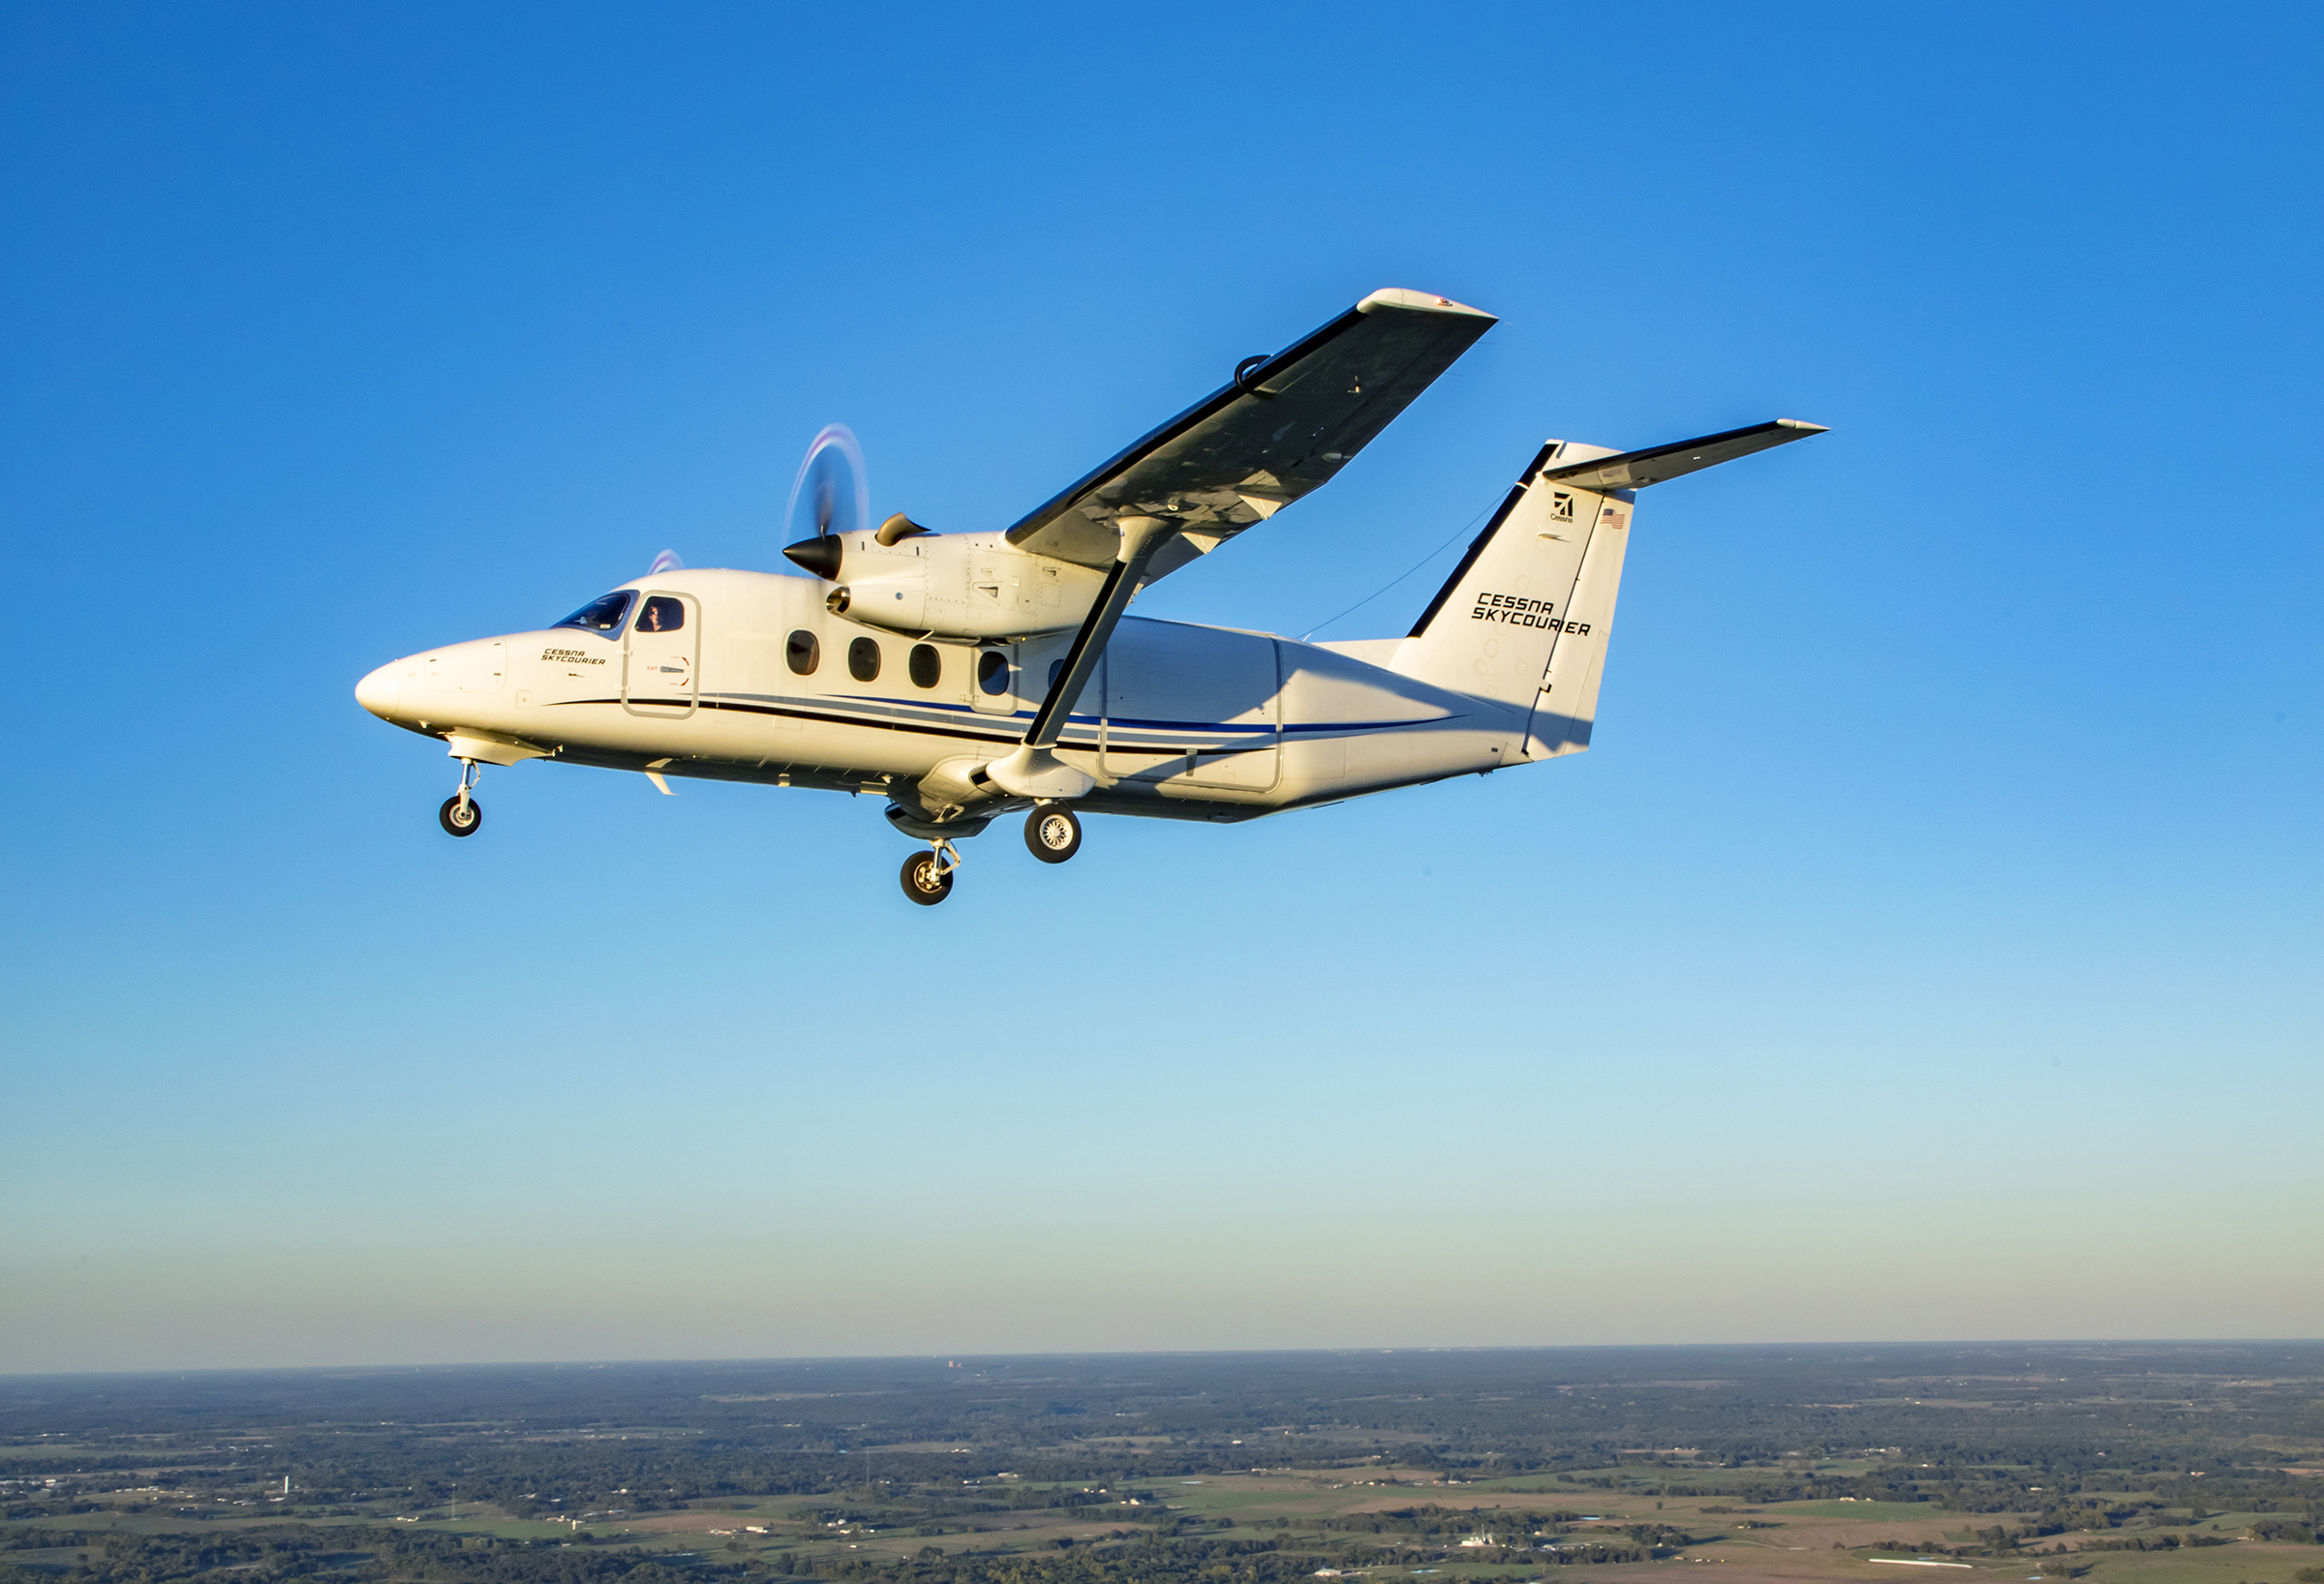 Textron to Deliver SkyCourier to Hinterland Aviation for Passenger Service